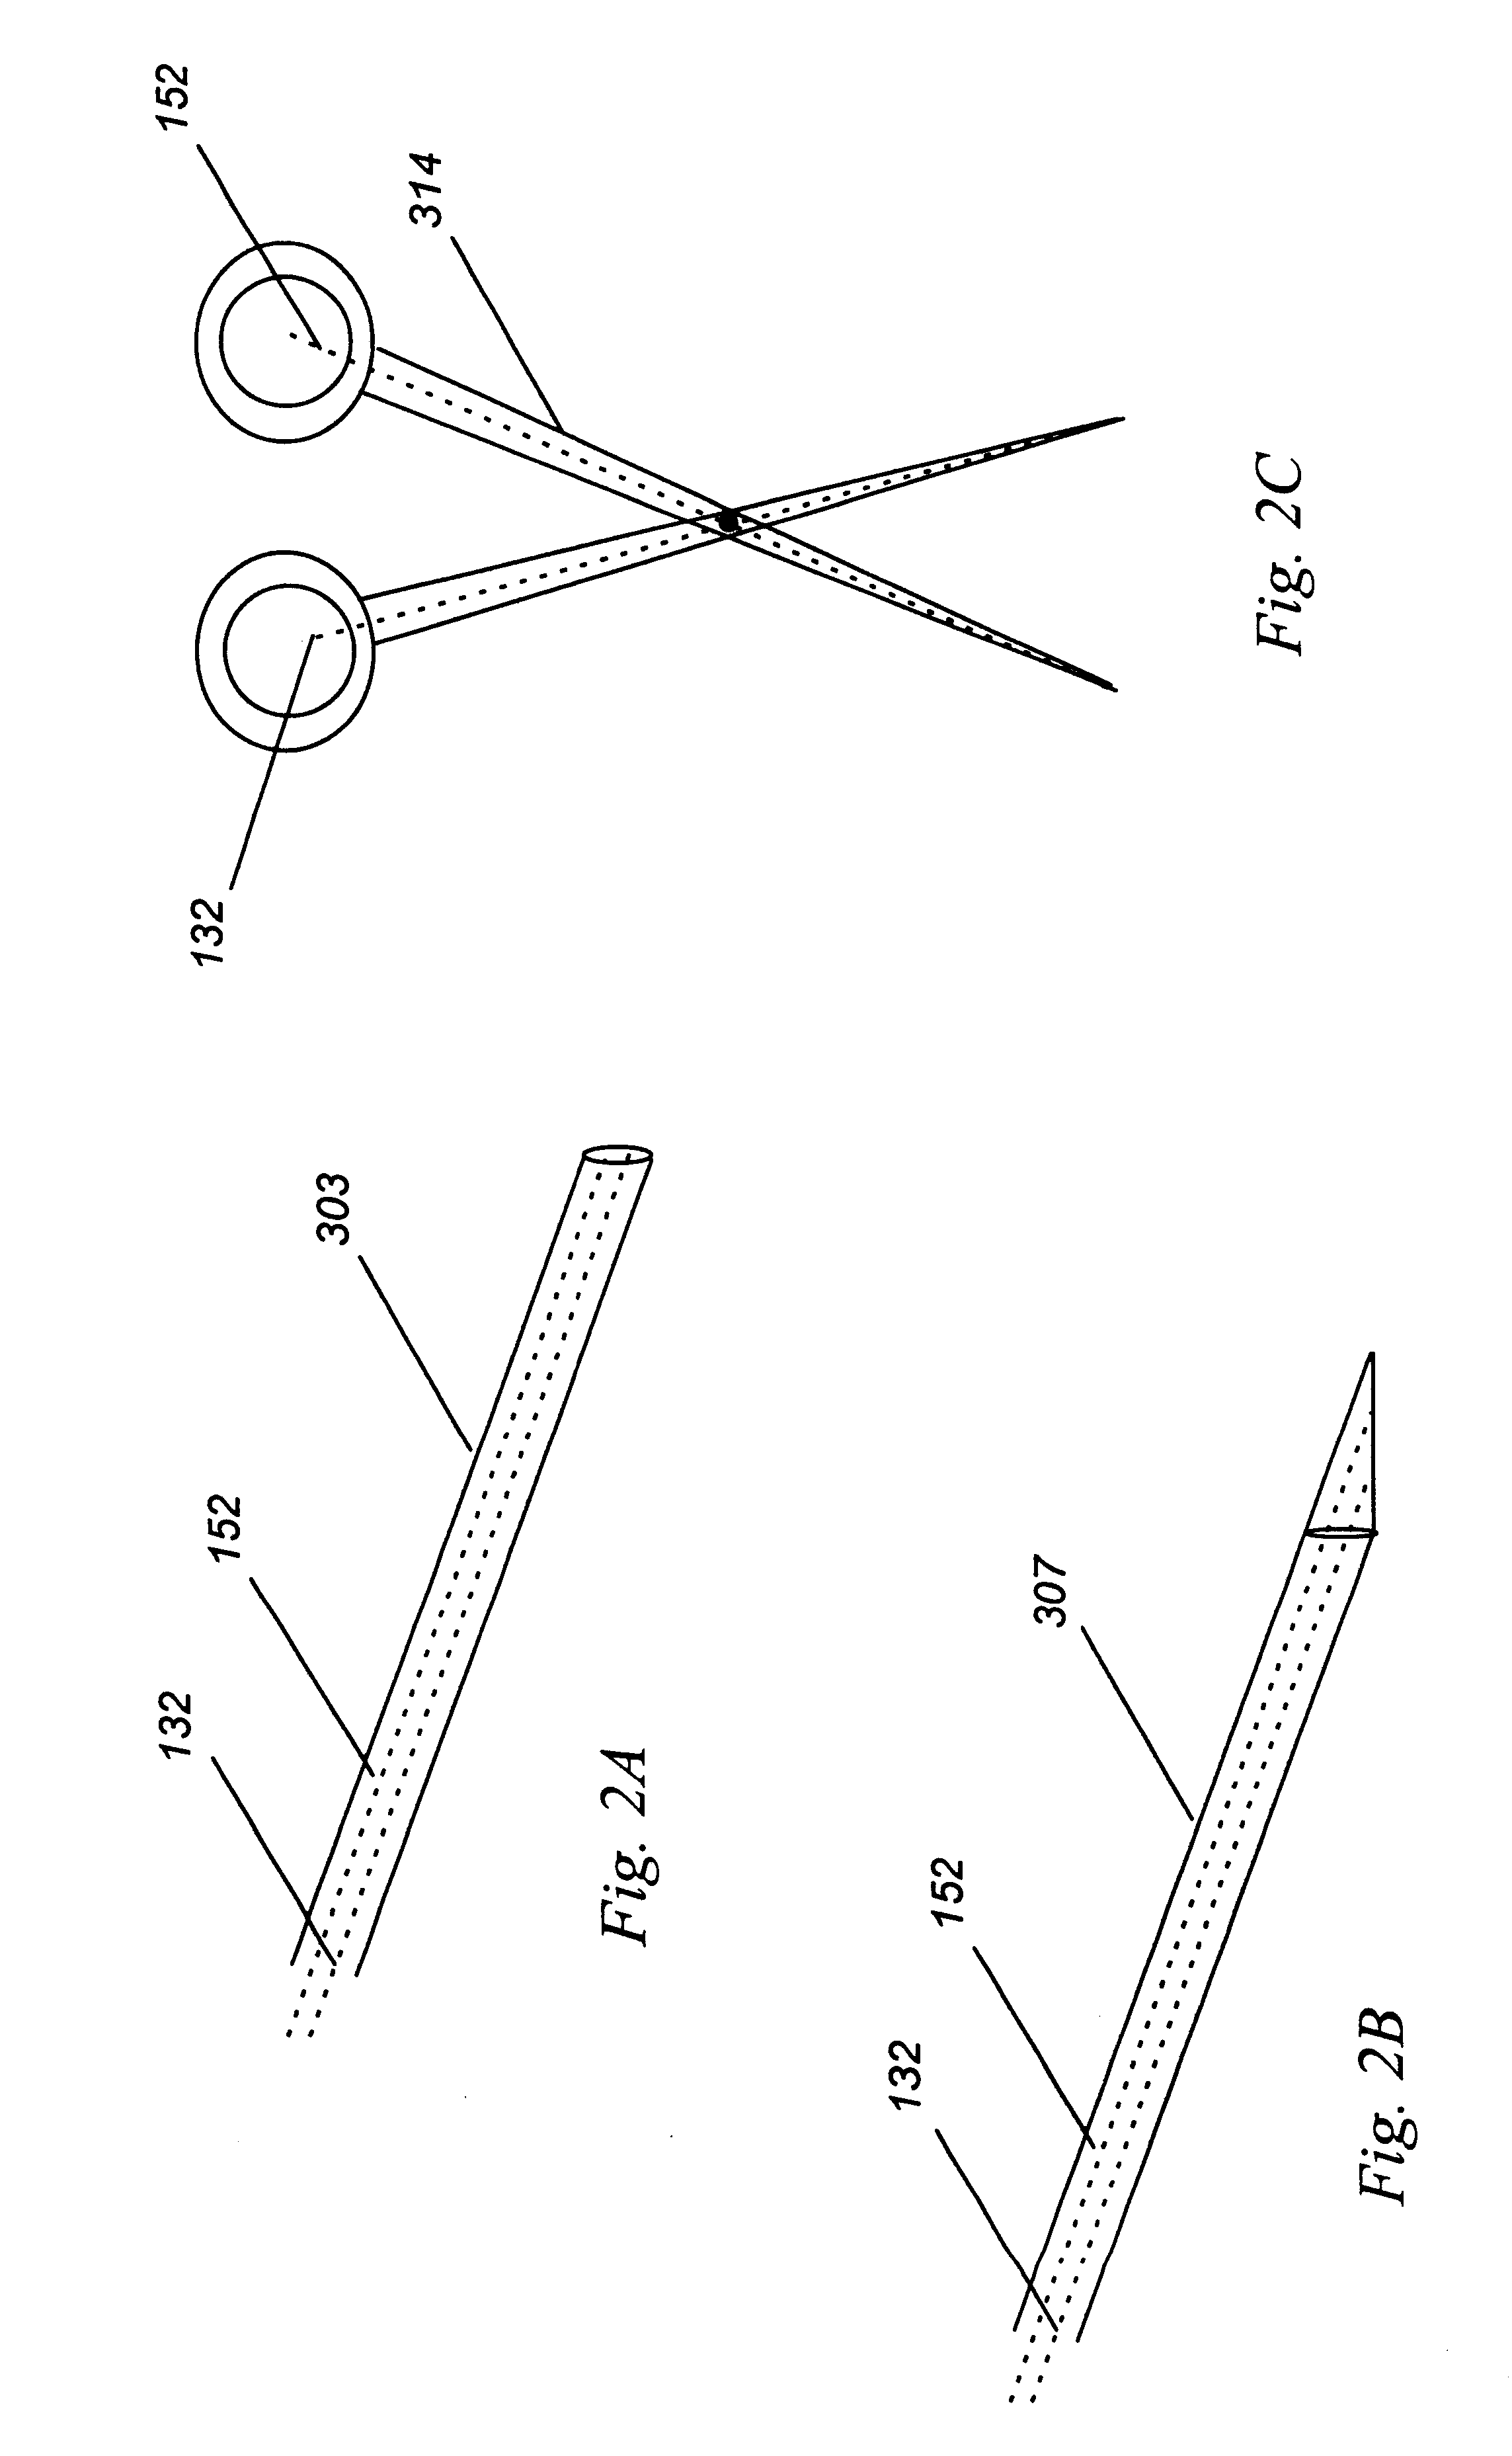 Device and method for classification of tissue